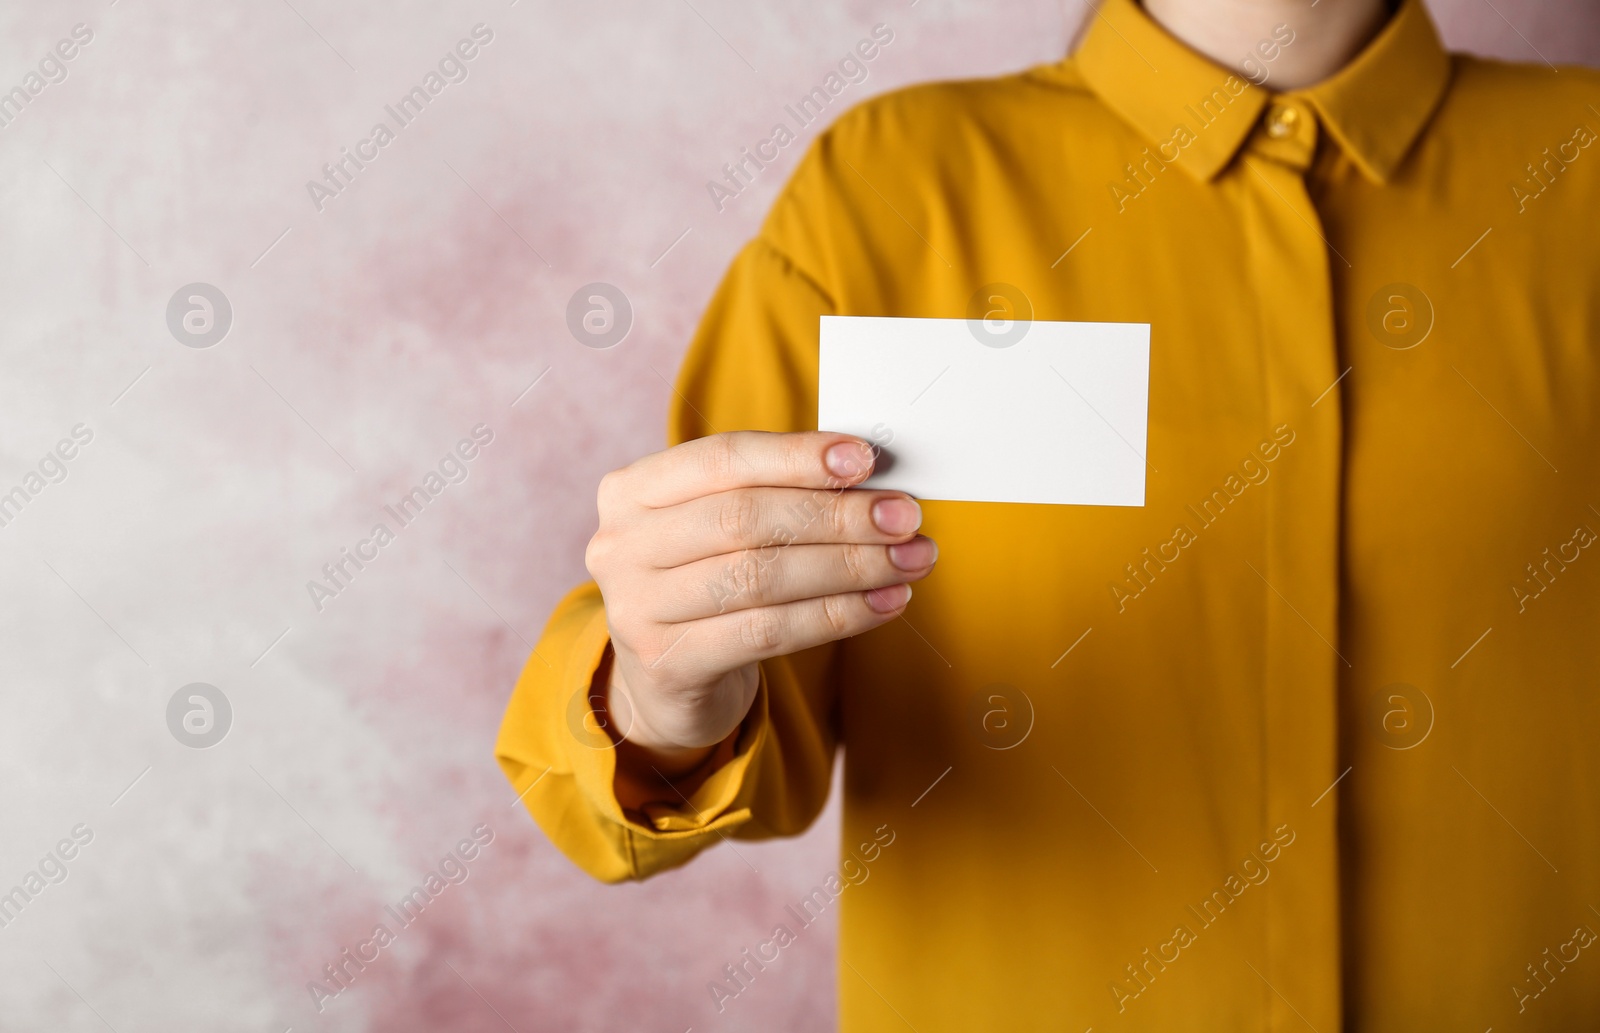 Photo of Woman holding blank business card on pink background, closeup. Mockup for design